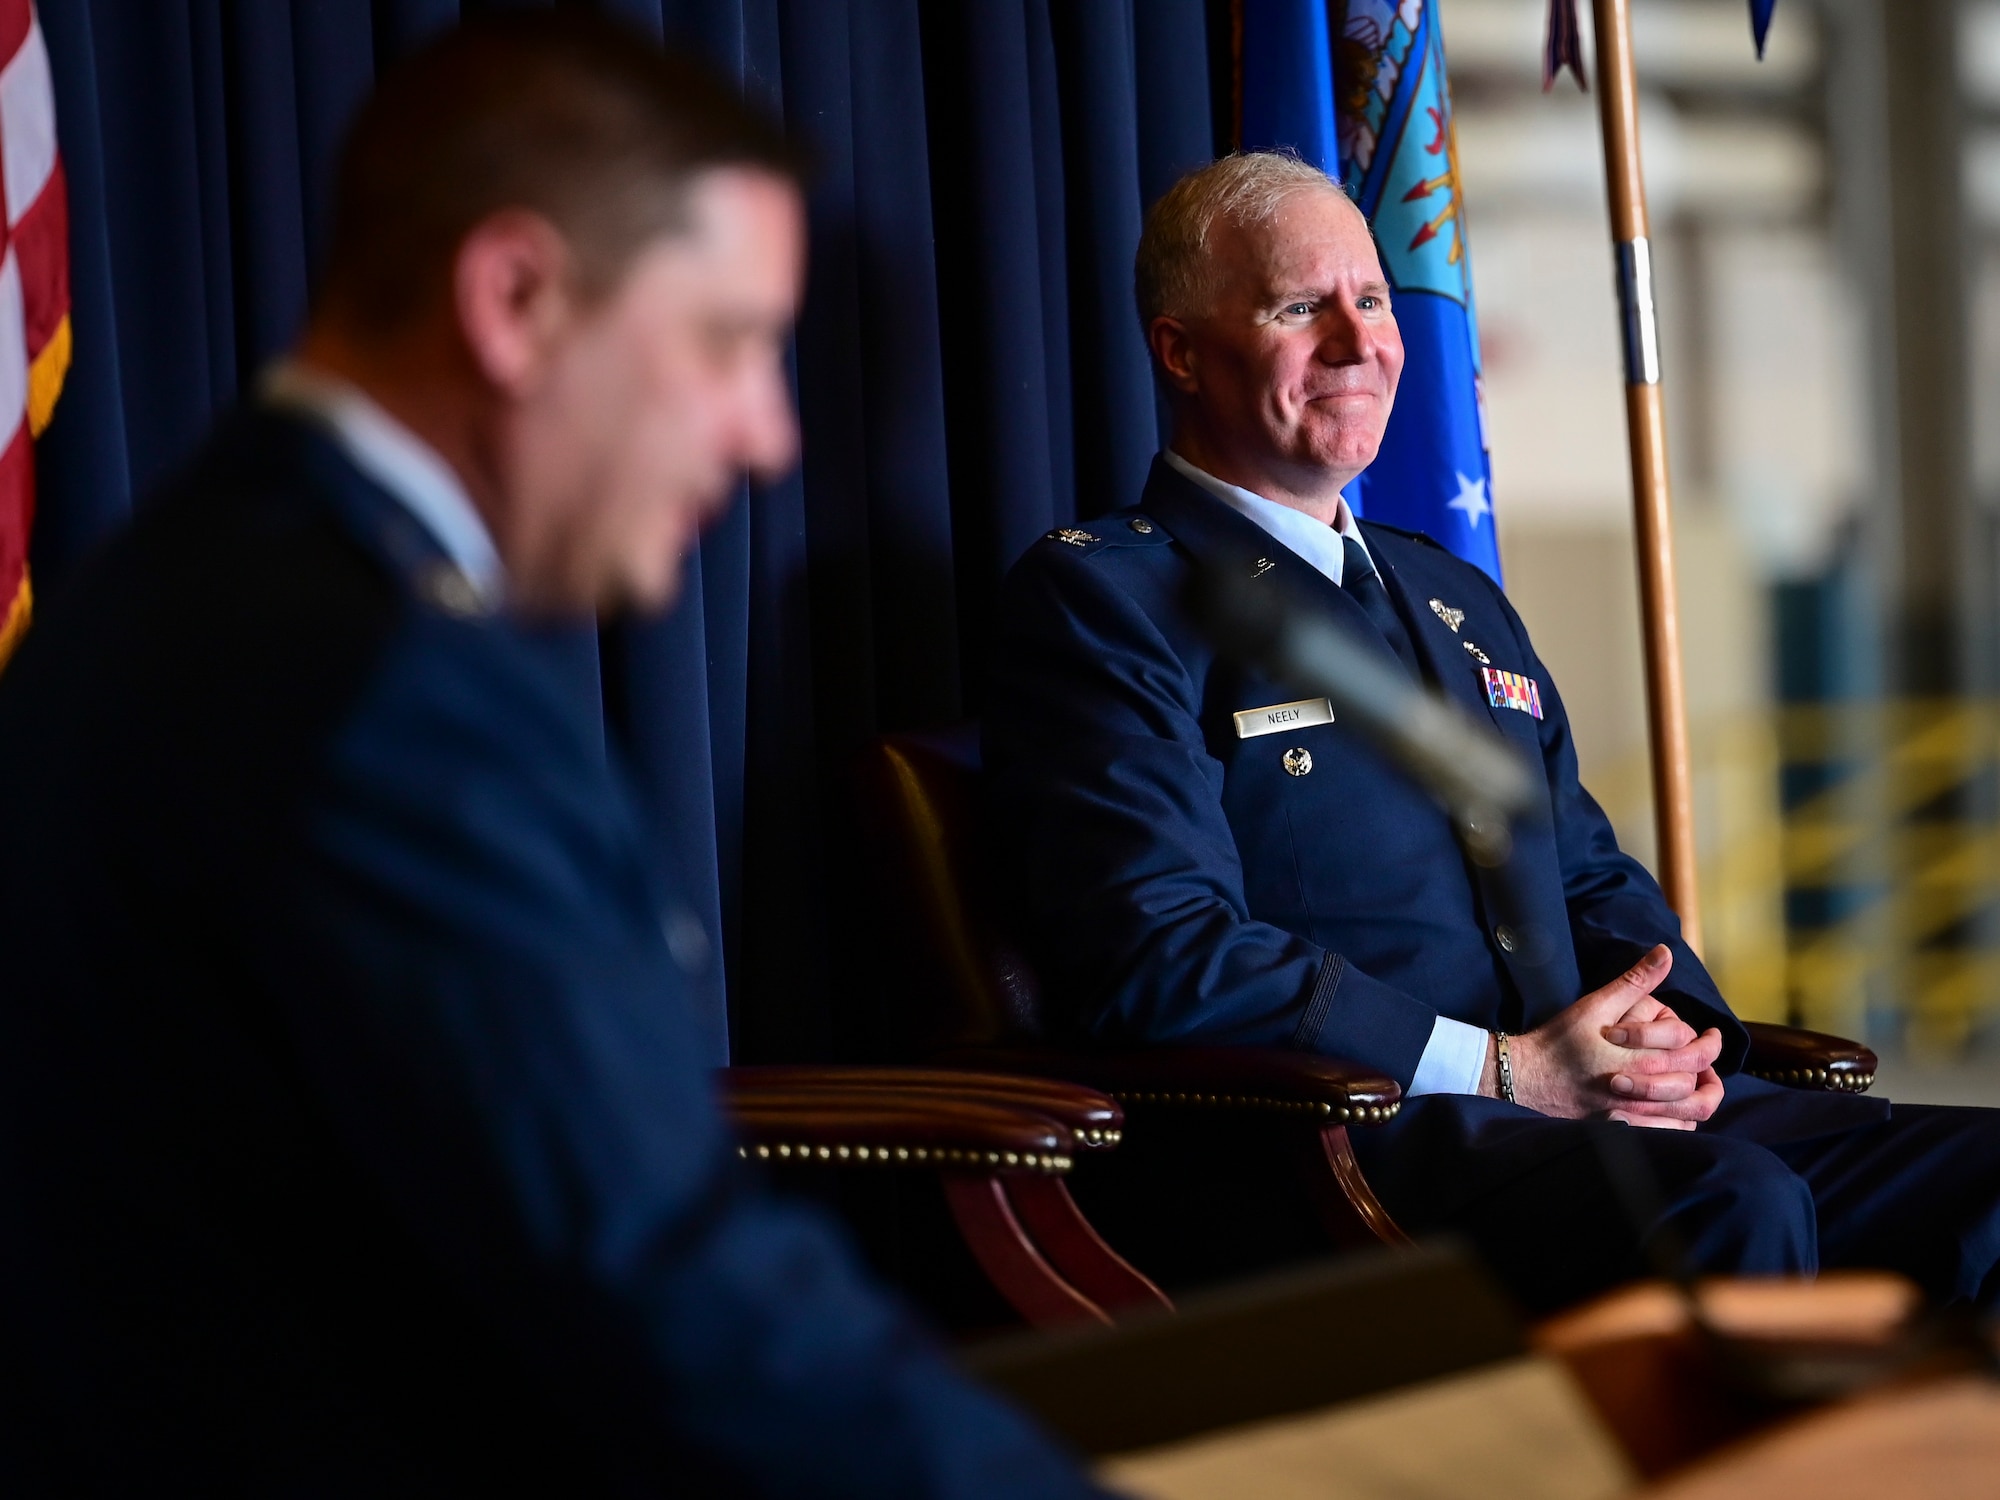 A man in Air Force blue dress uniform sits in a chair during a ceremony.